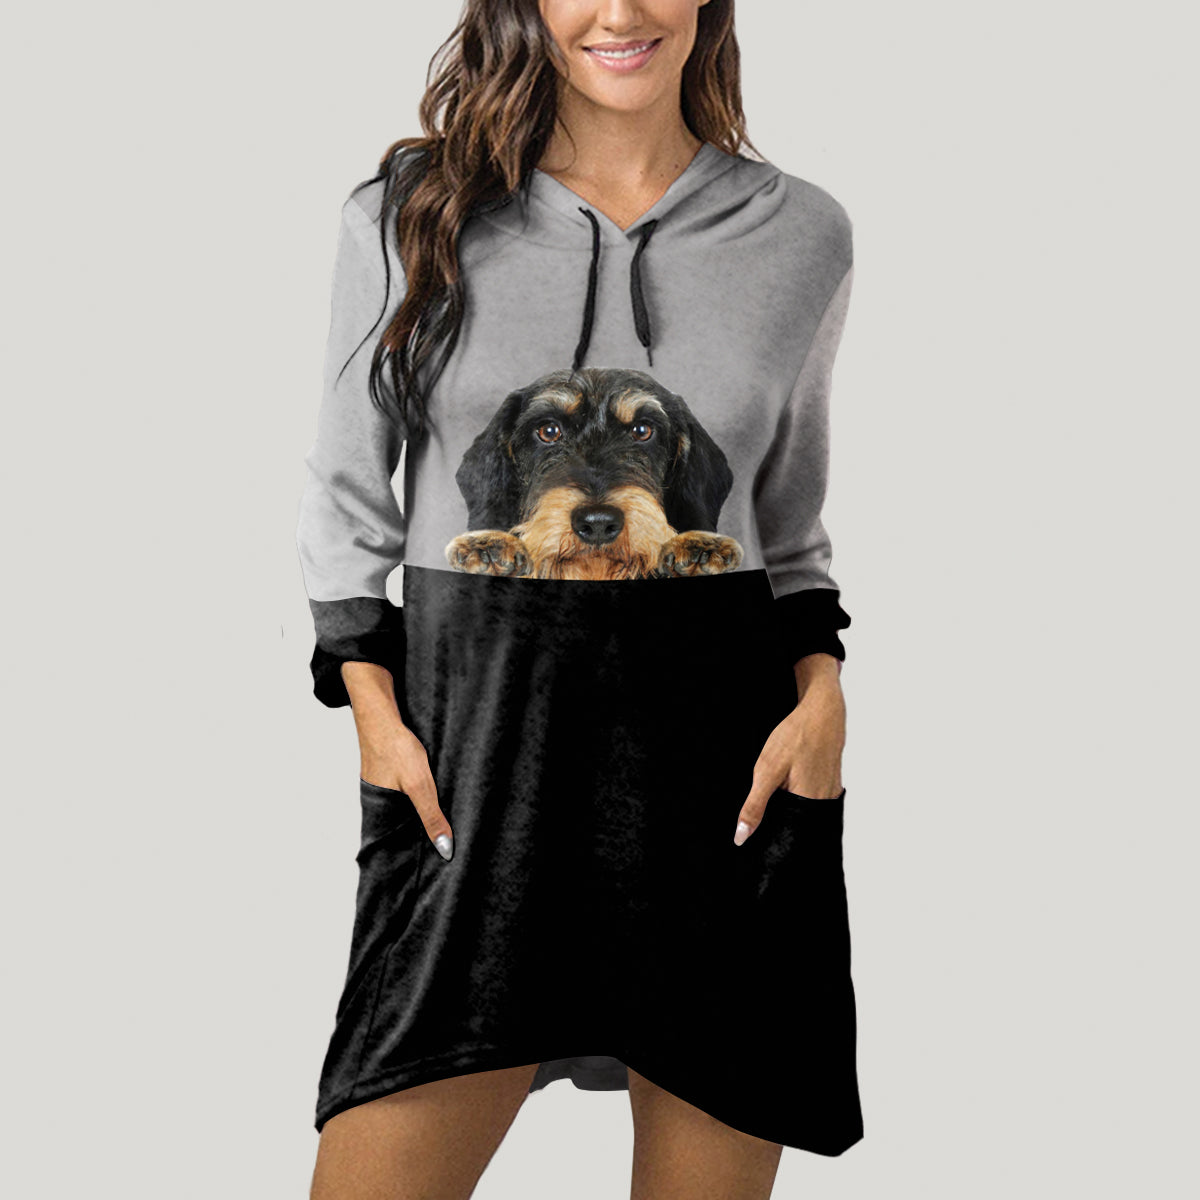 Can You See Me Now - Wire Haired Dachshund Hoodie With Ears V1